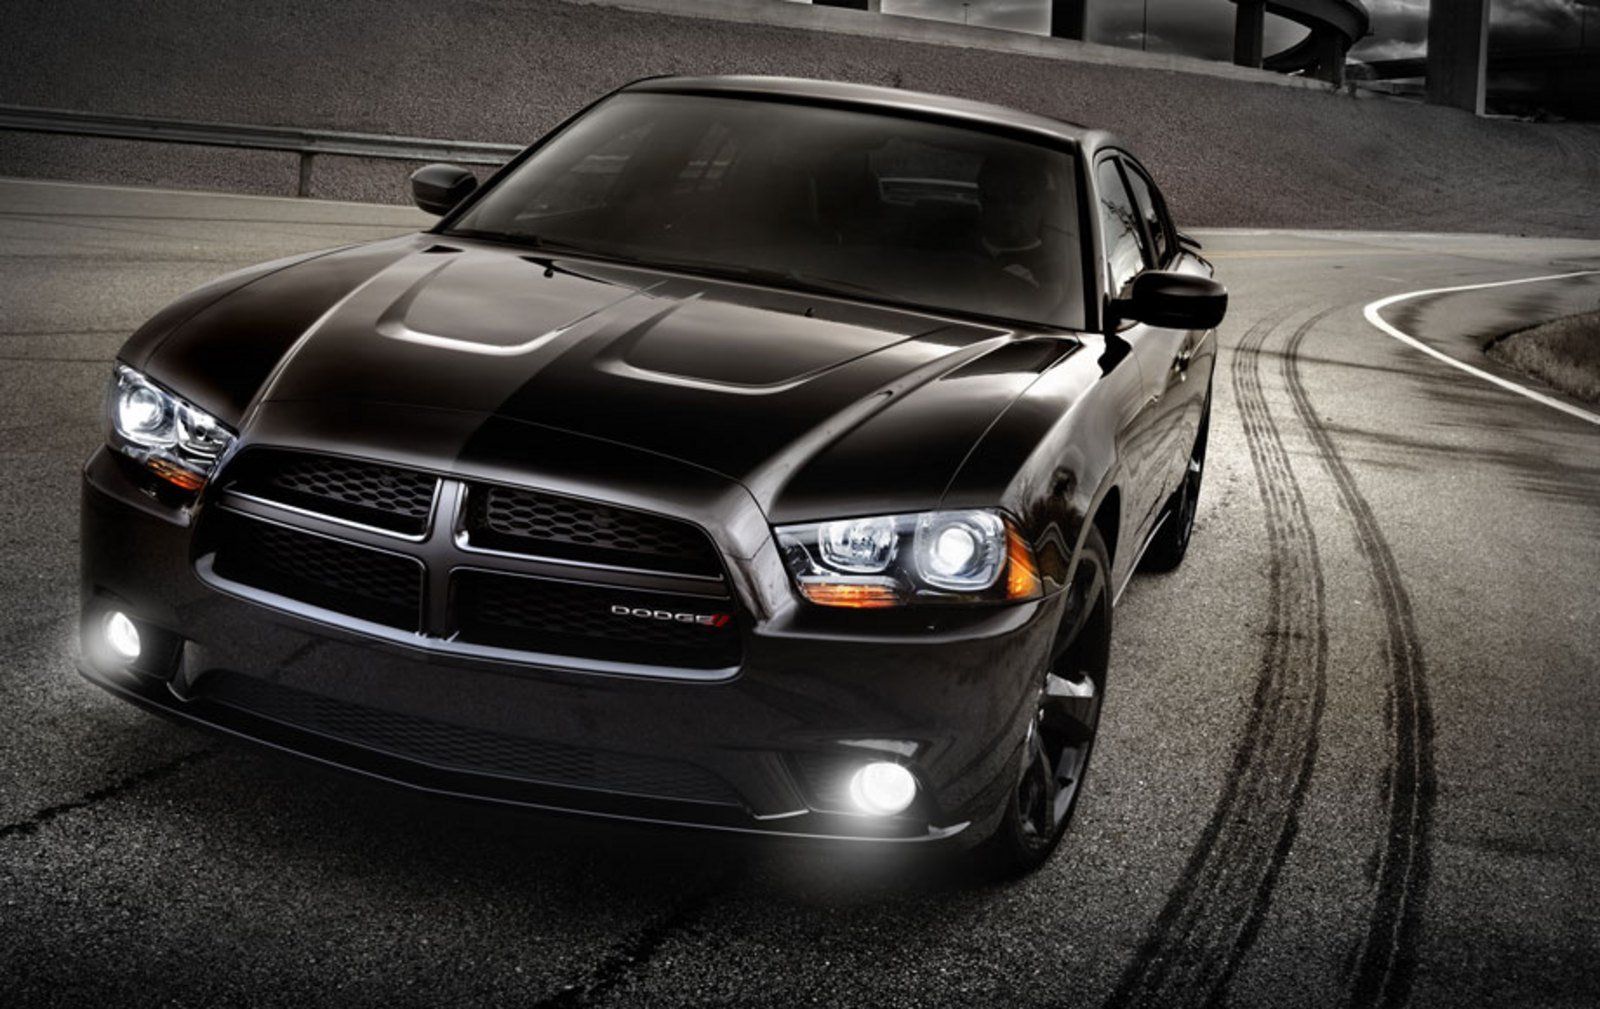 2013 Dodge Charger R/T Blacktop Review - Top Speed